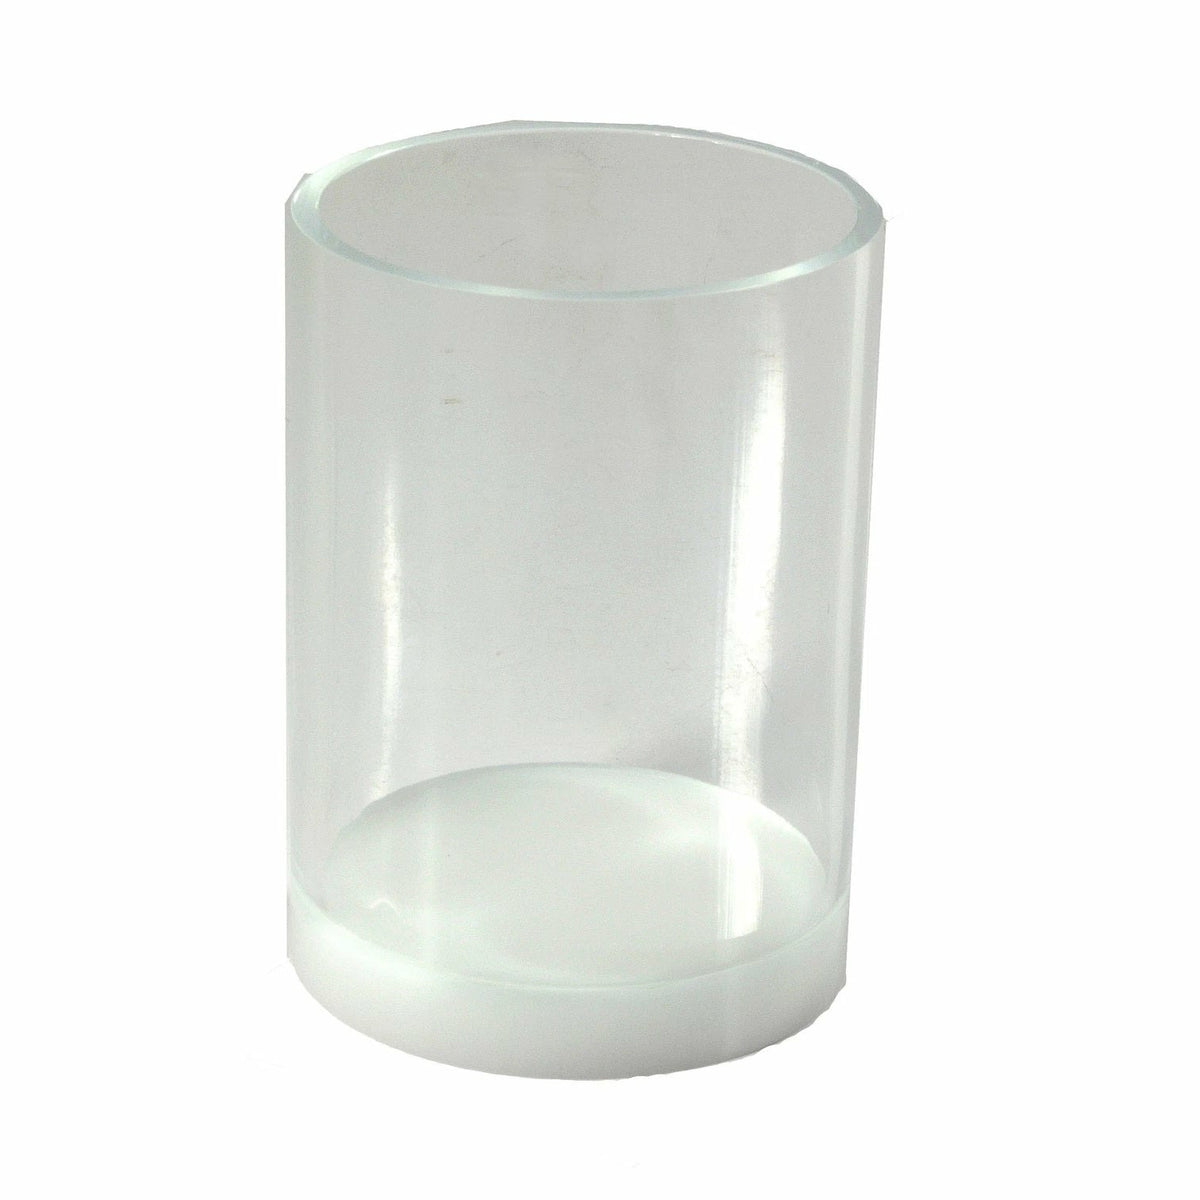 Mike and Ally Ice Lucite Bath Accessories Tumbler White